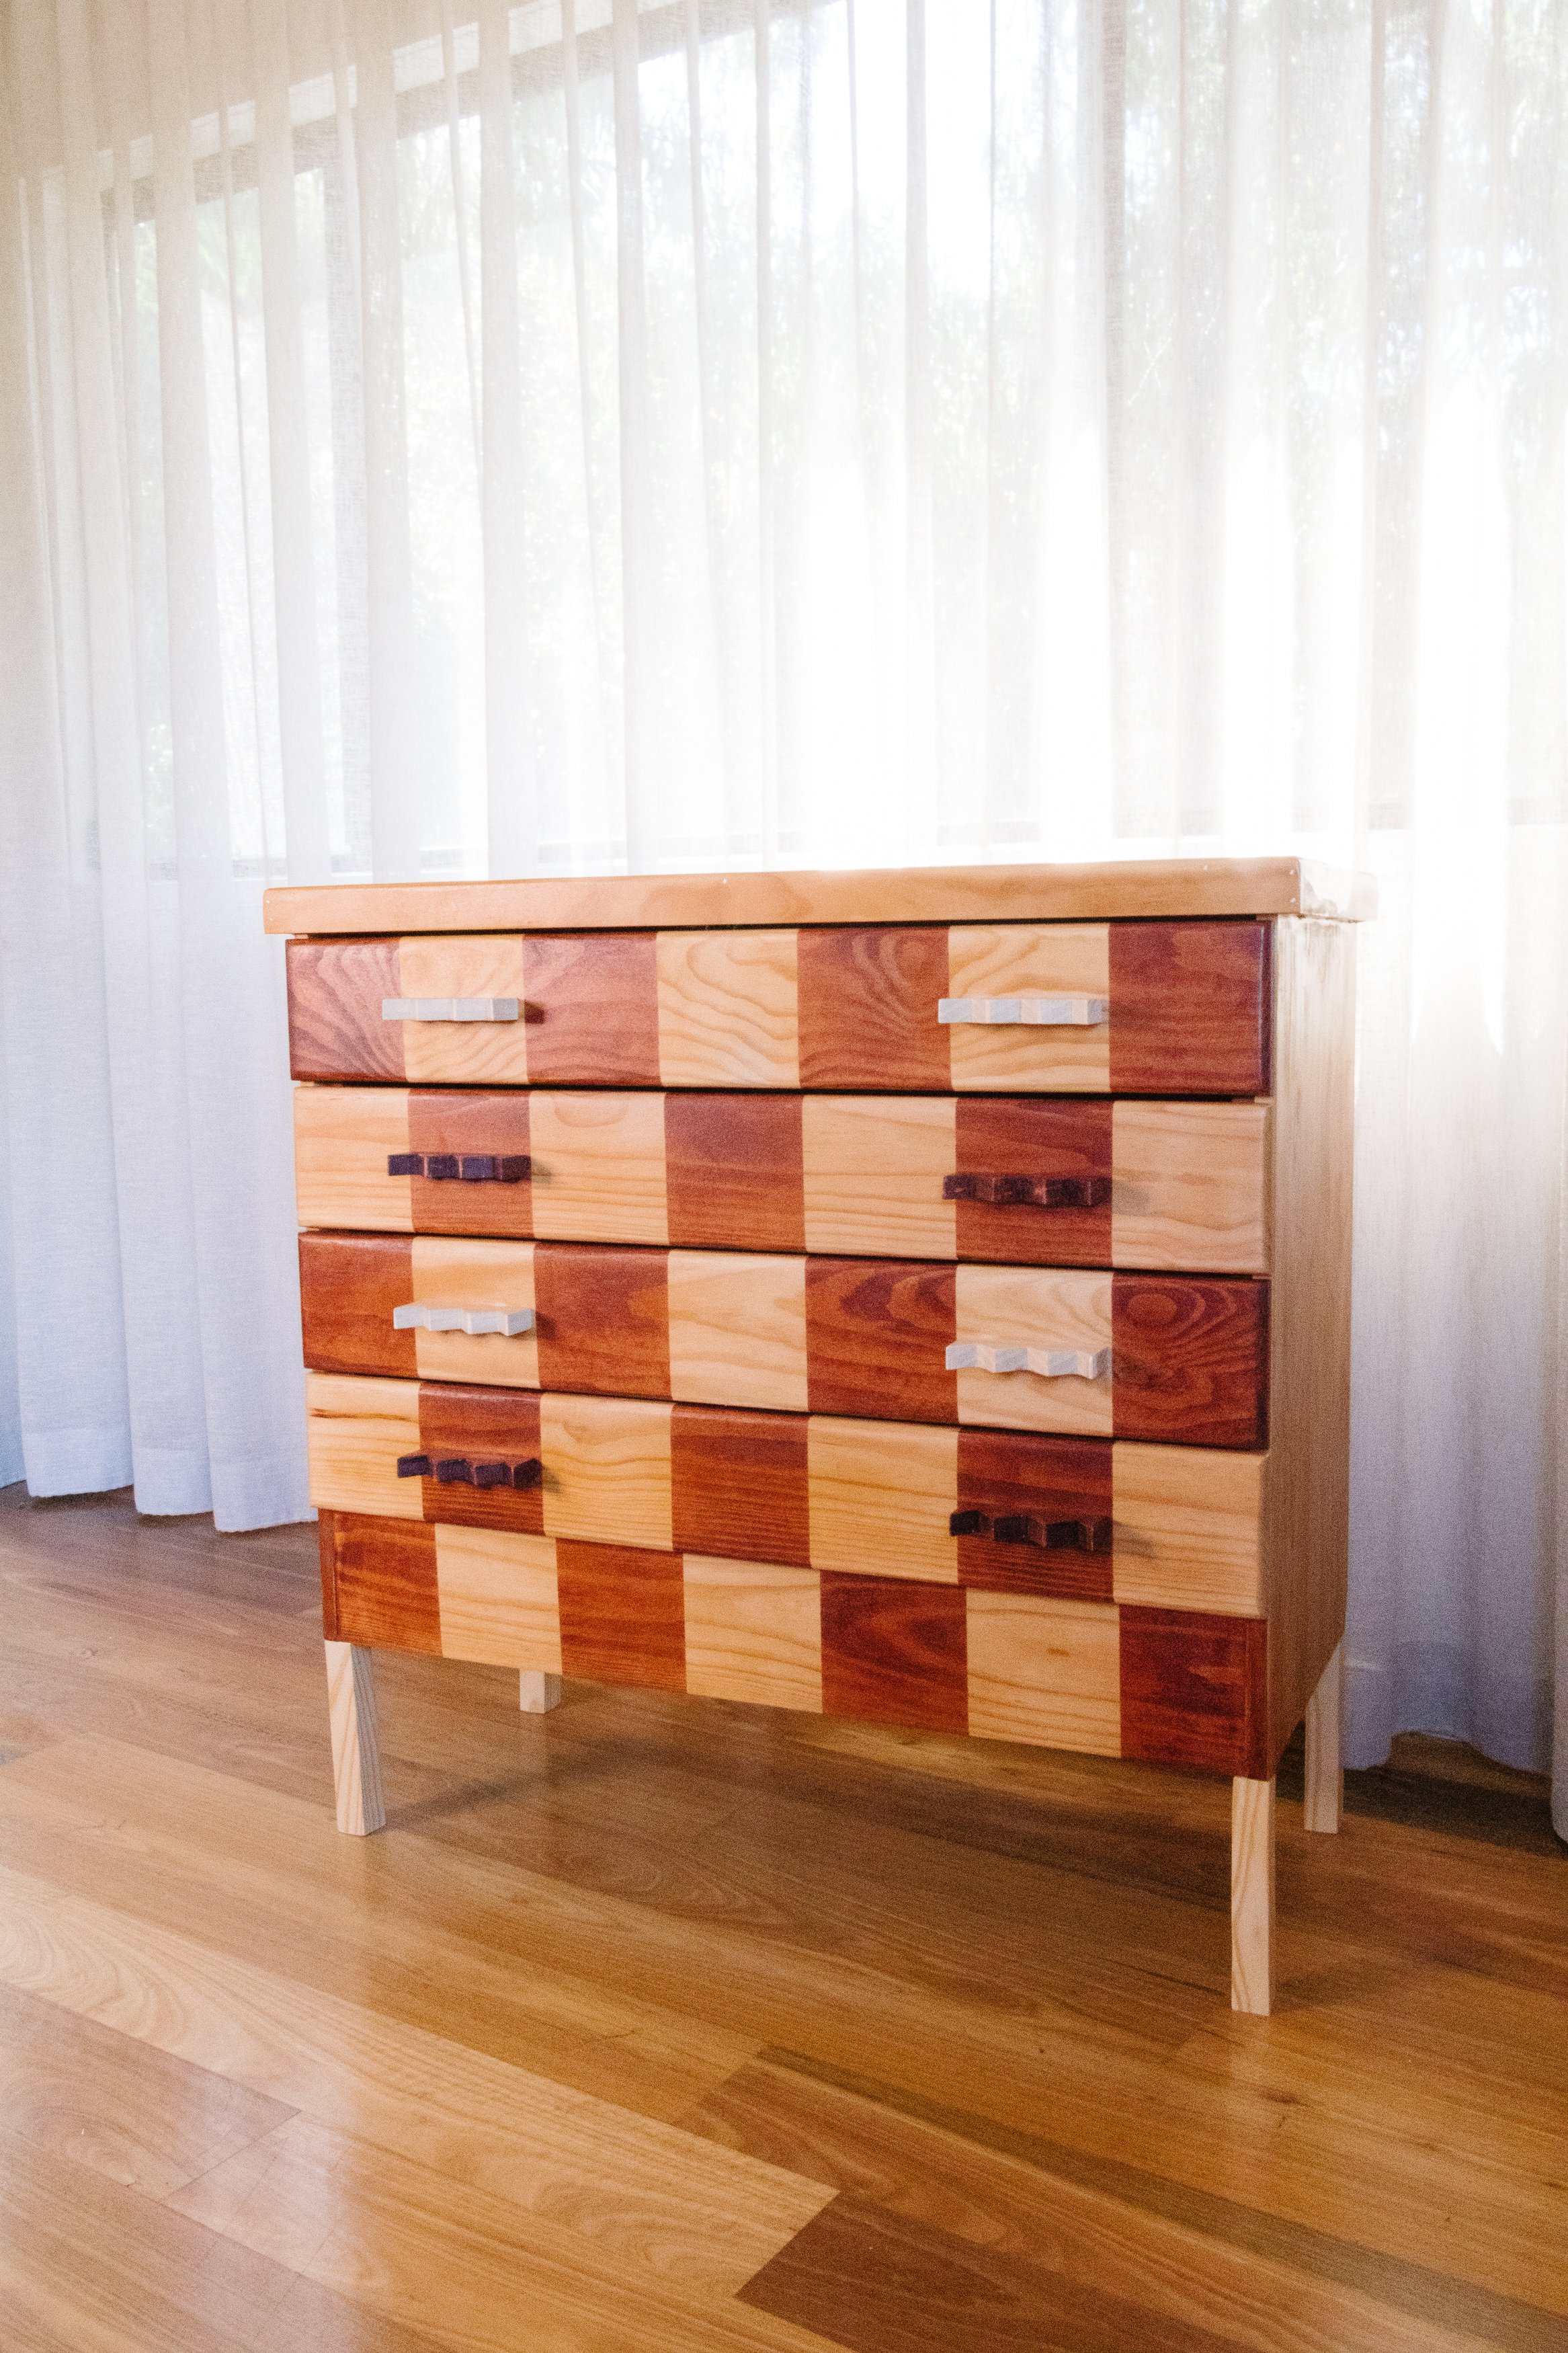 Upcycled Timber Stained Checker Drawers (11 of 79).jpg